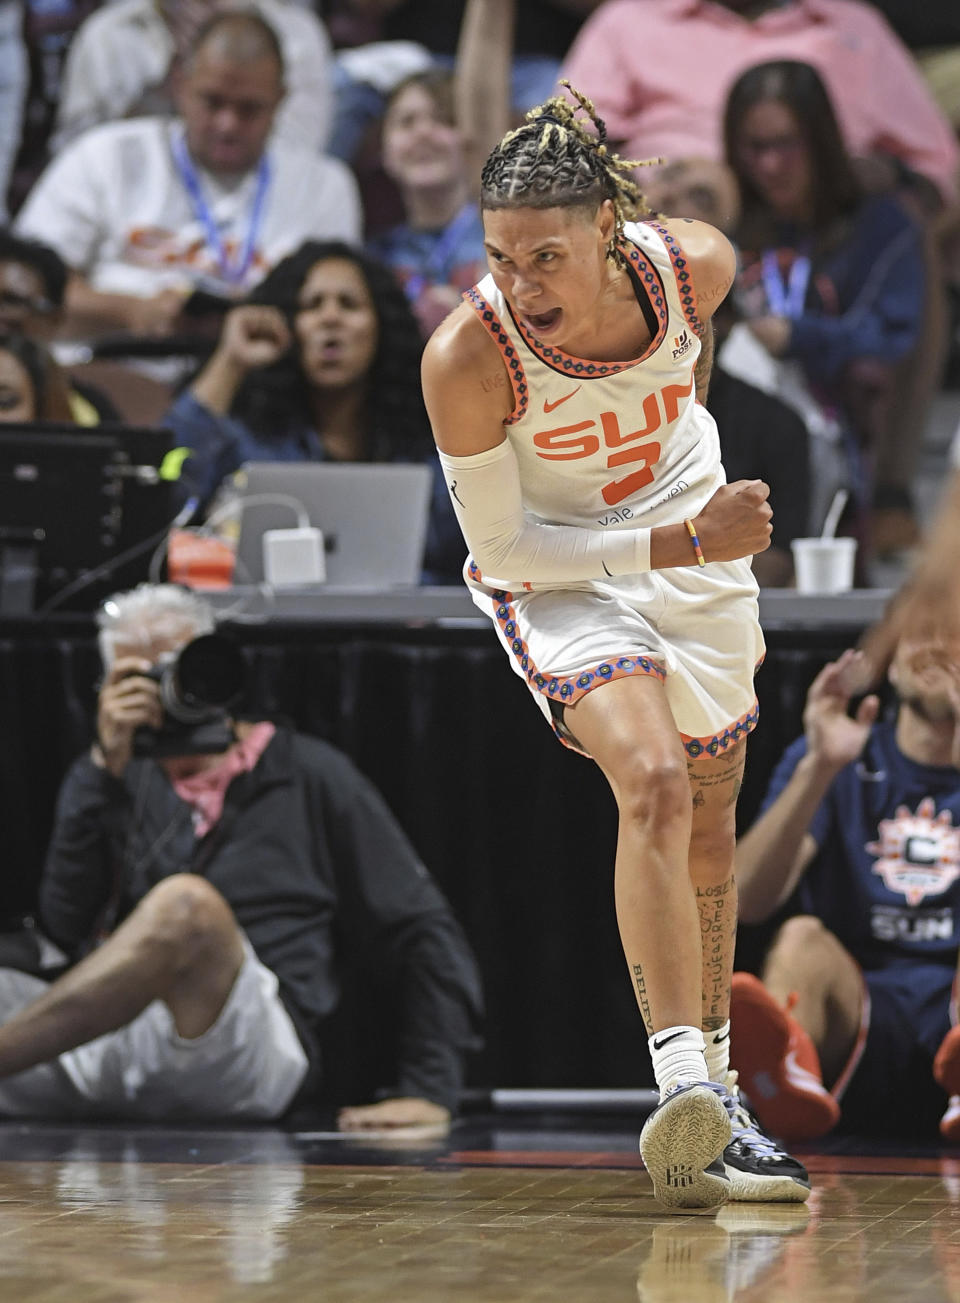 Connecticut Sun guard Natisha Hiedeman (2) celebrates after scoring on a fast break against the Dallas Wings during Game 1 of a WNBA basketball first-round playoff series Thursday, Aug. 18, 2022, in Uncasville, Conn. (Sean D. Elliot/The Day via AP)